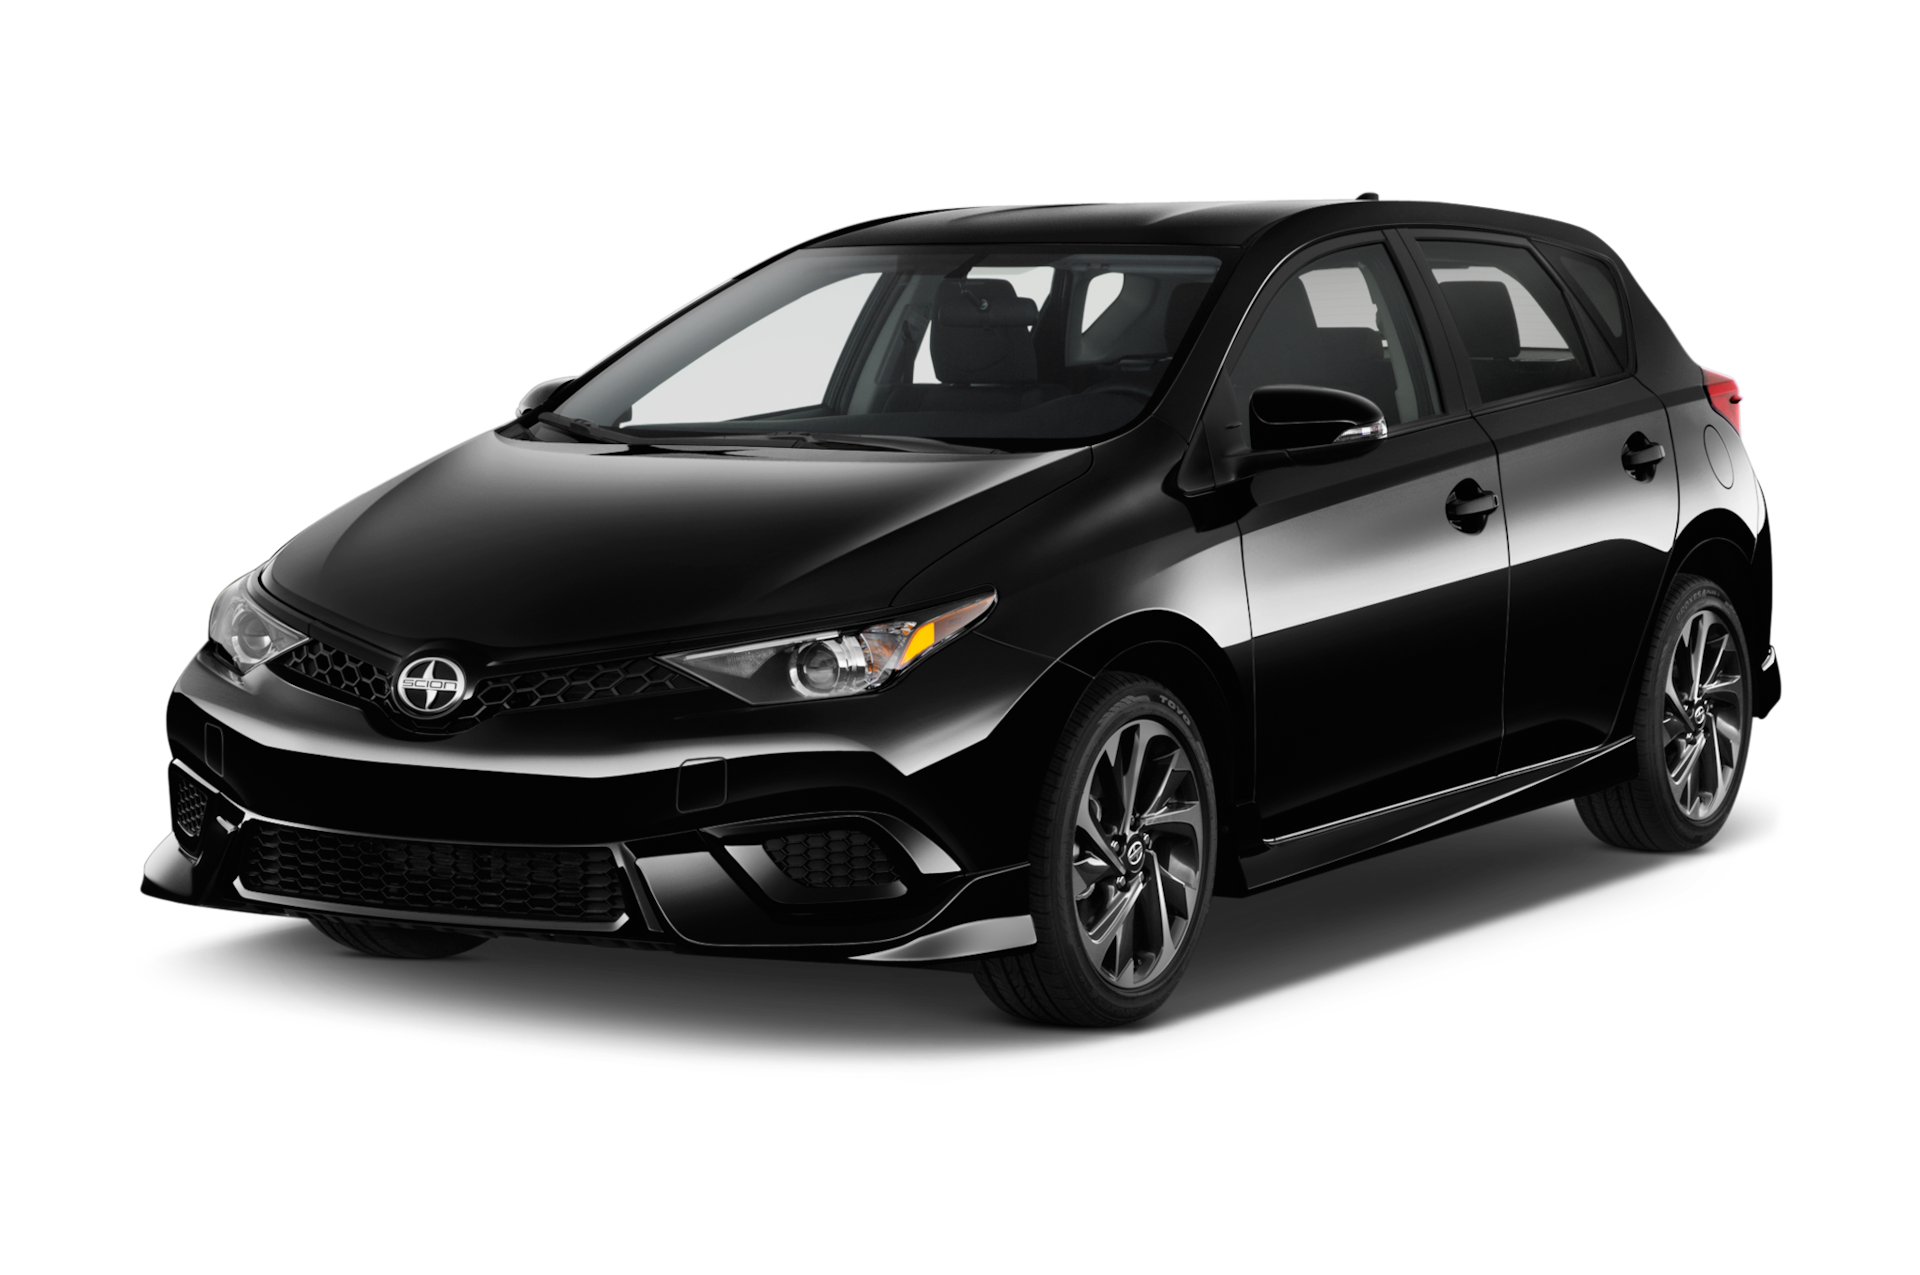 2016 Scion IM Prices, Reviews, and Photos - MotorTrend